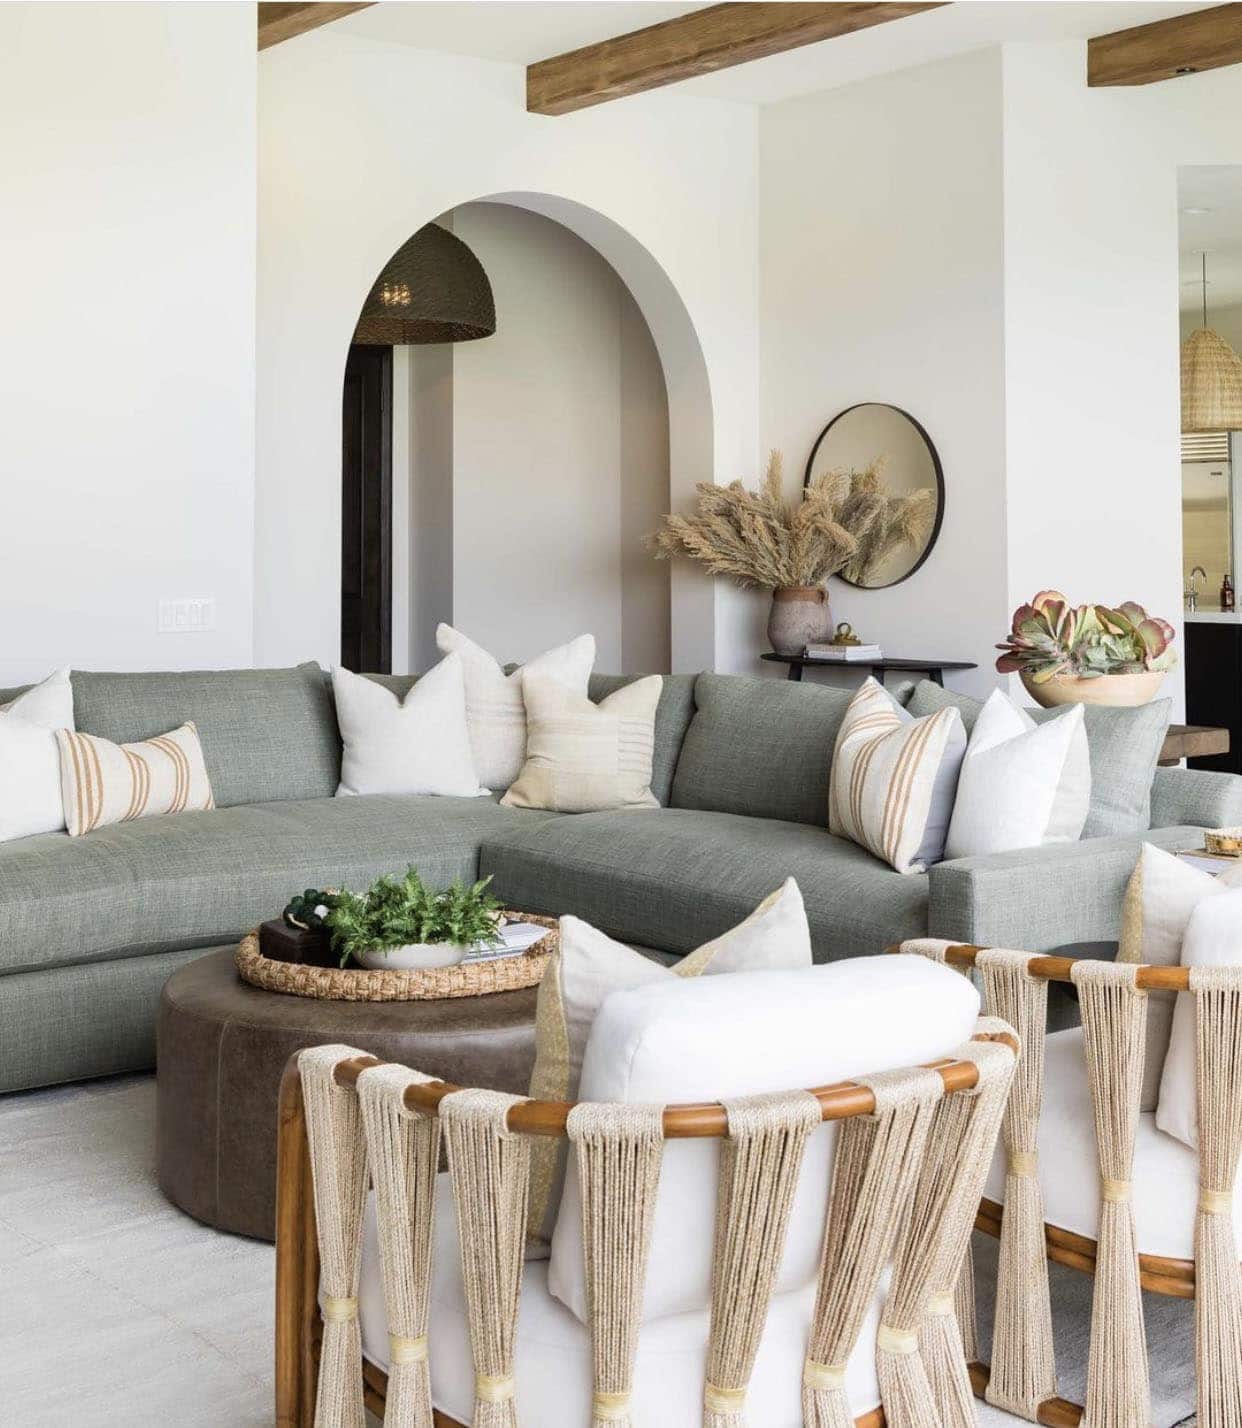 Figuring out the best furniture layout in a living room. Inspiration via Pure Salt Interiors